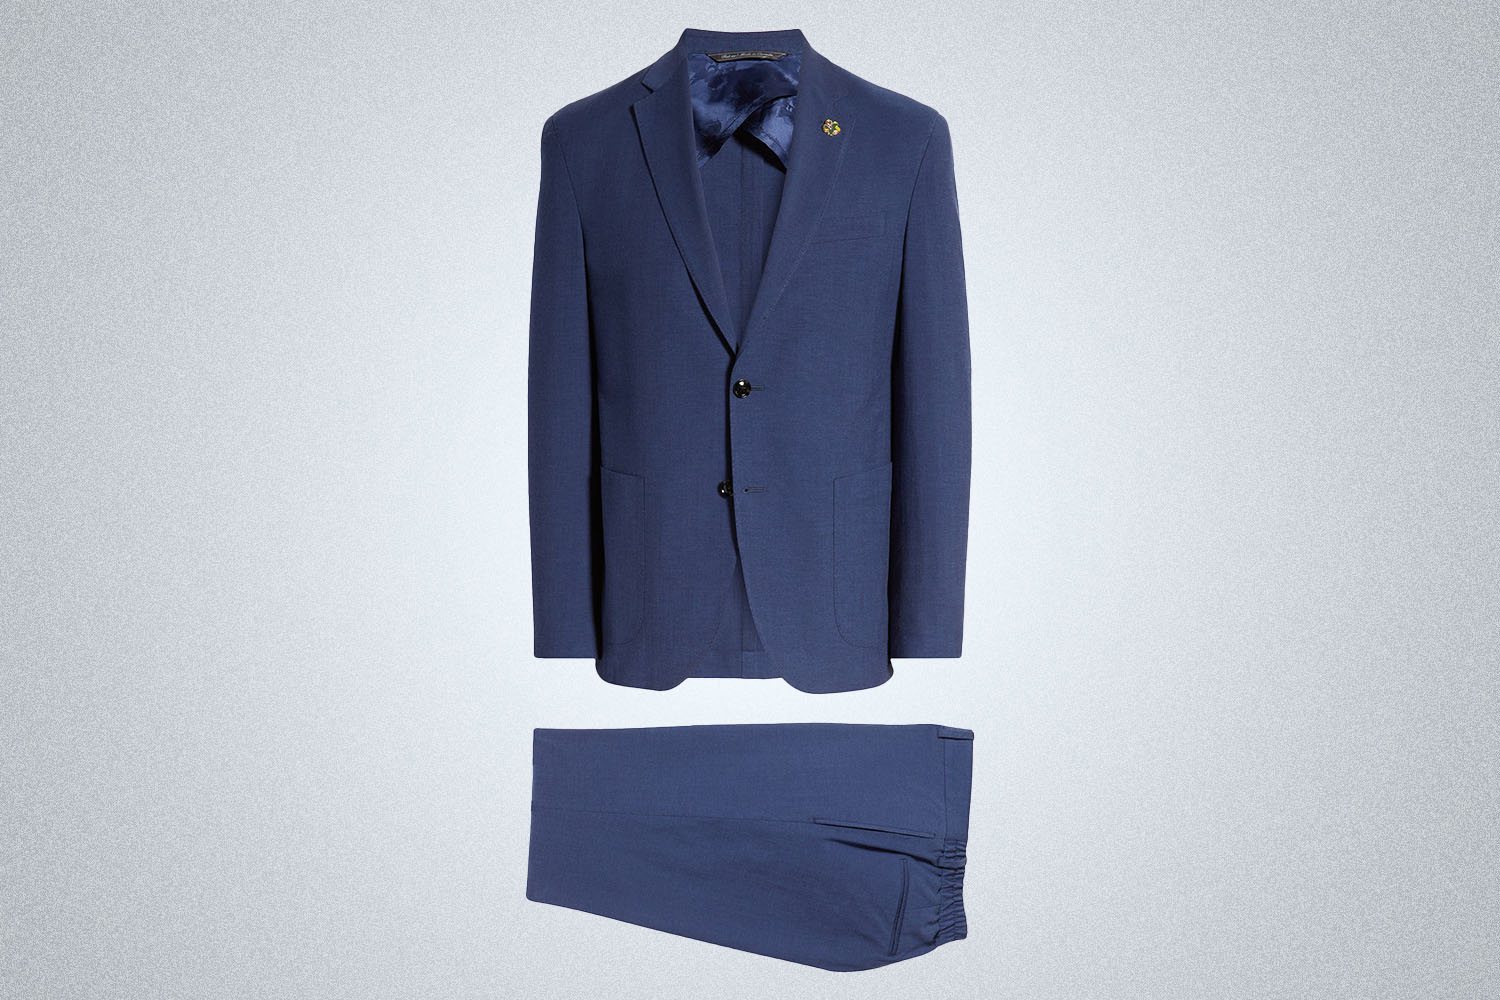 A blue Ted Baker London suit jacket and pants on a grey background